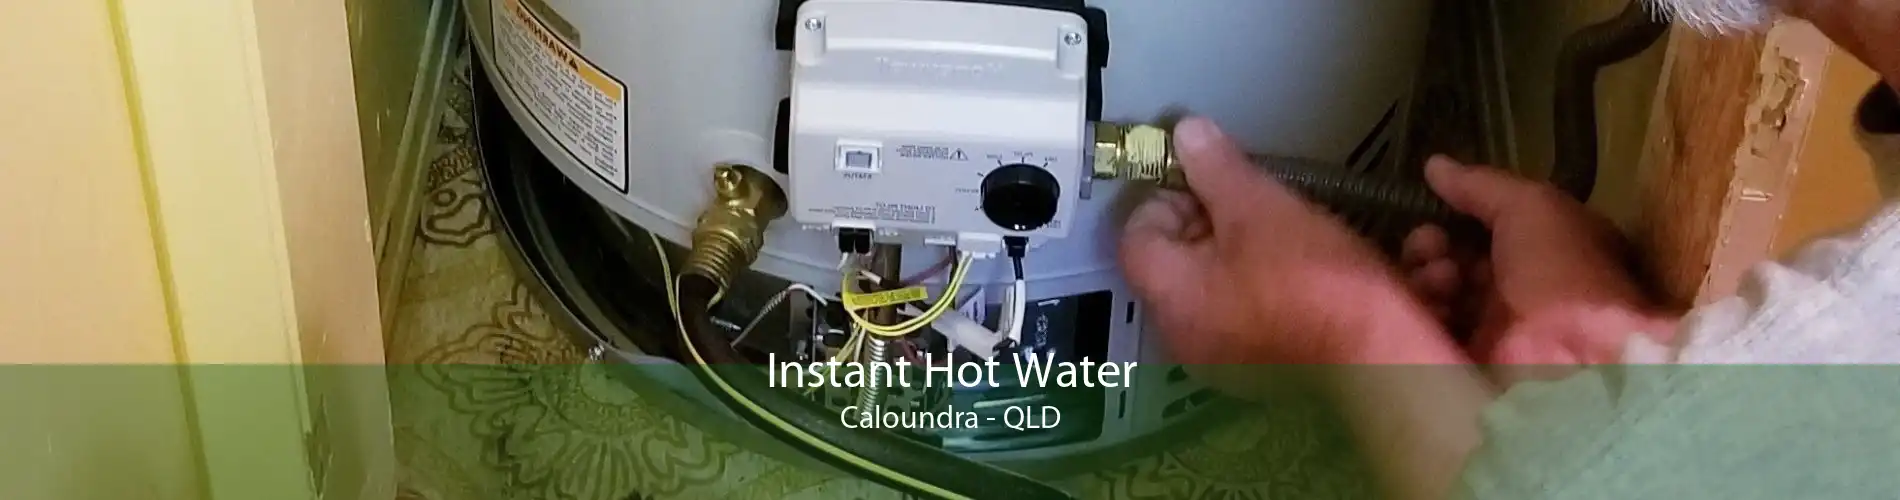 Instant Hot Water Caloundra - QLD